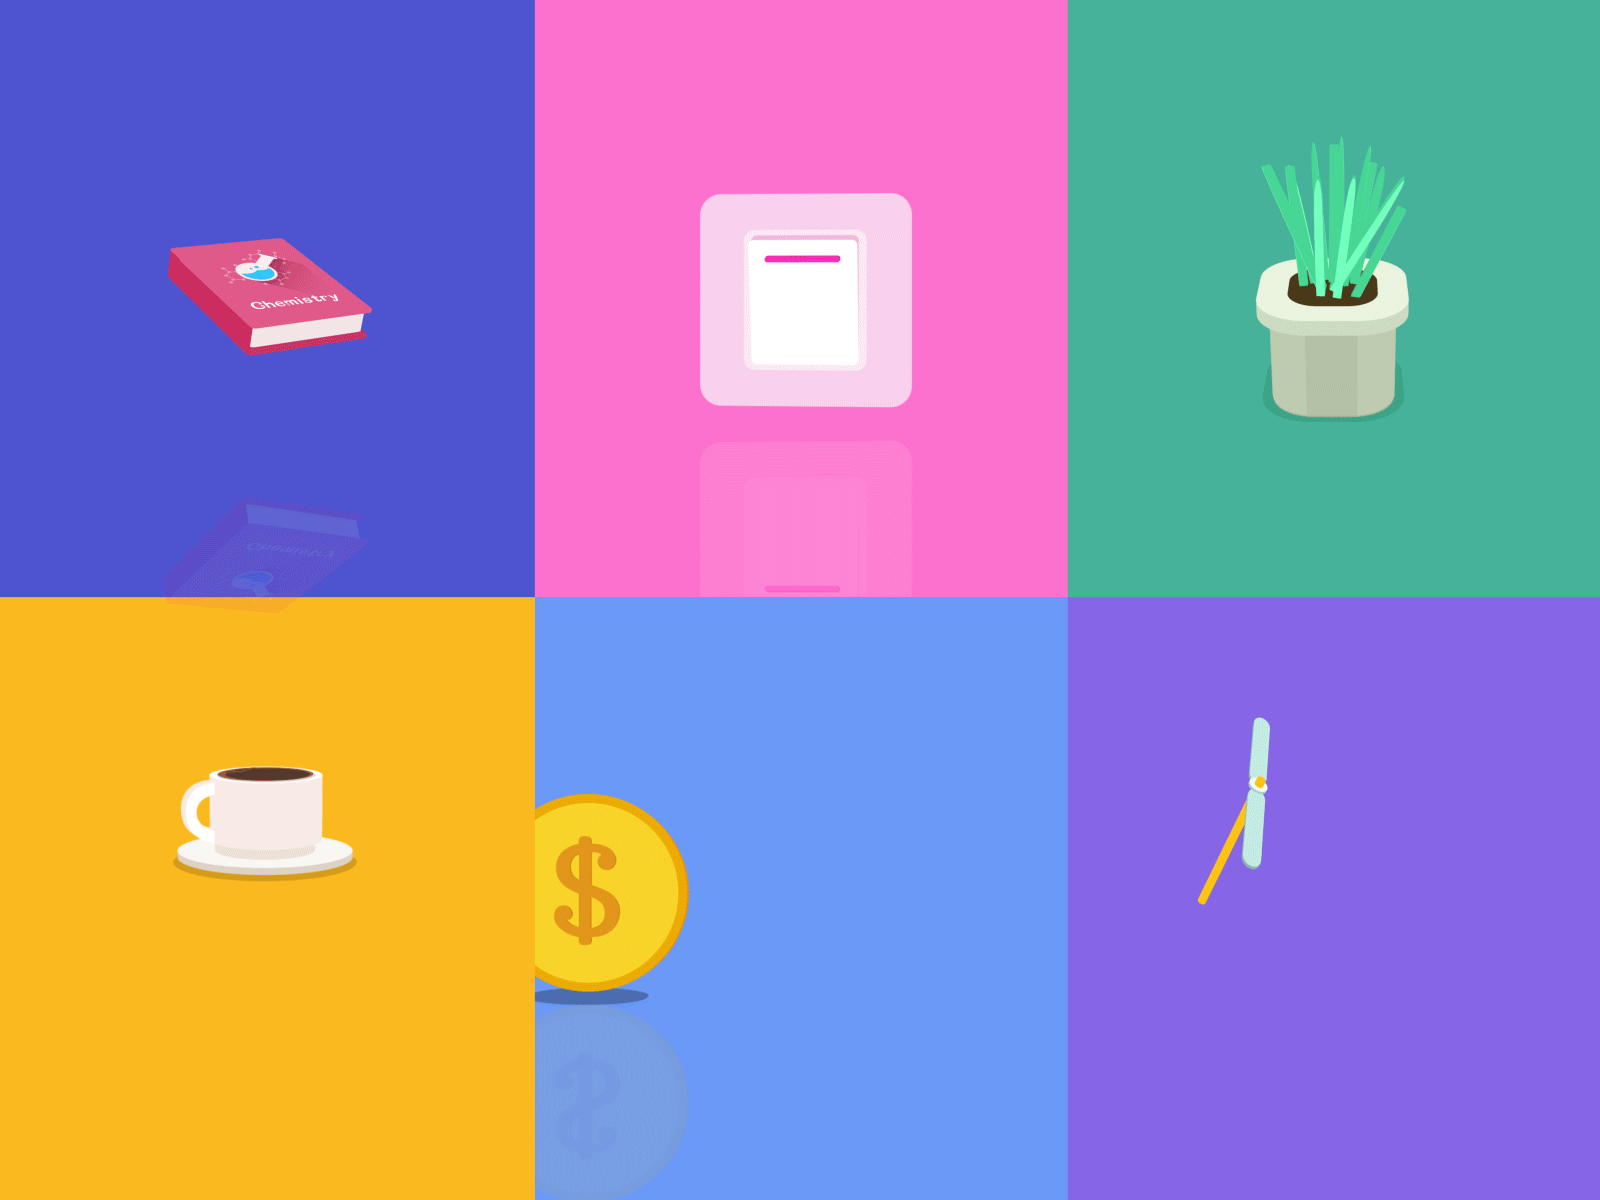 3D Animation Icons by Yingfang Xie on Dribbble